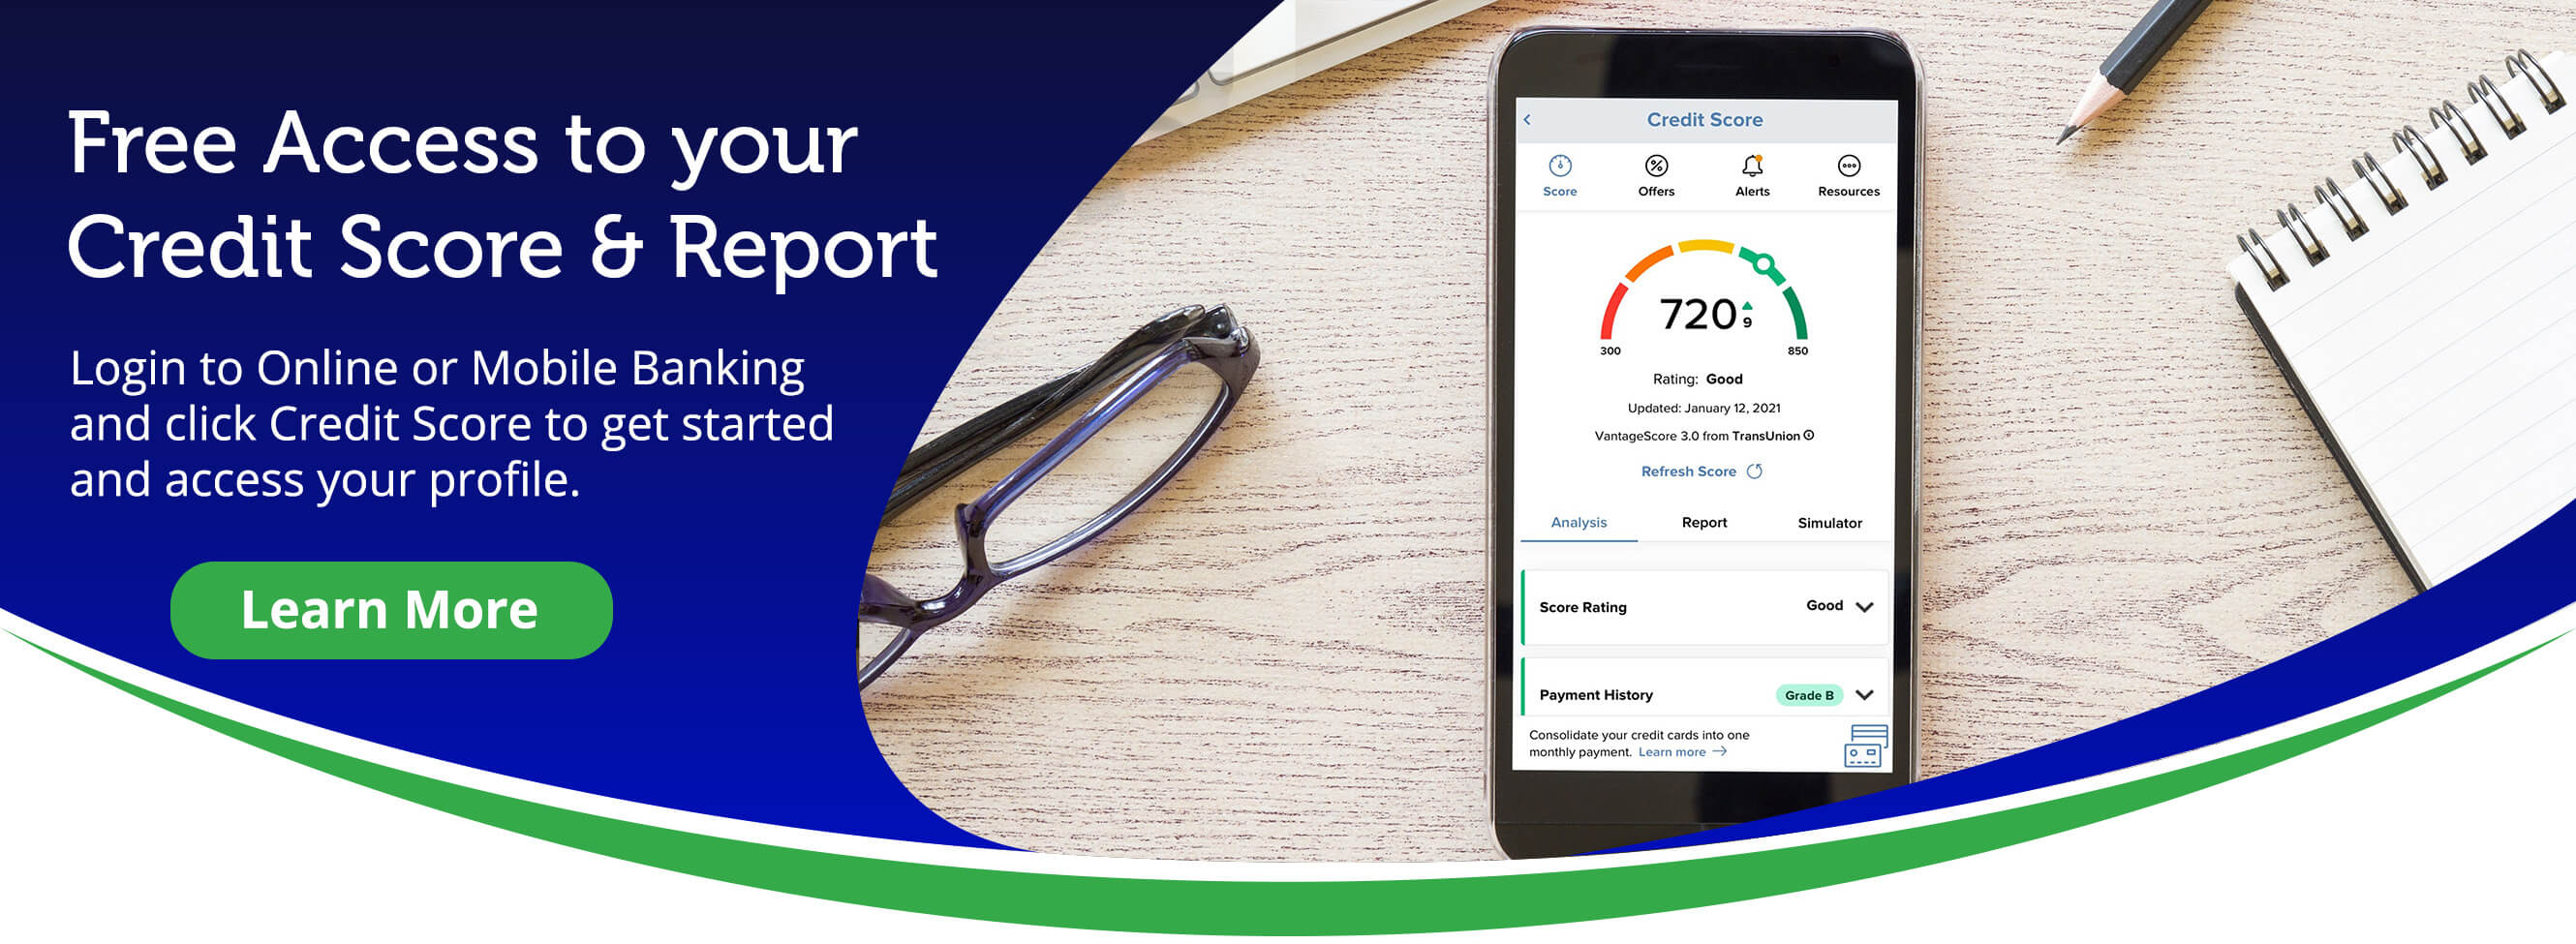 Learn how to access your credit score and report for free through Online and Mobile Banking.